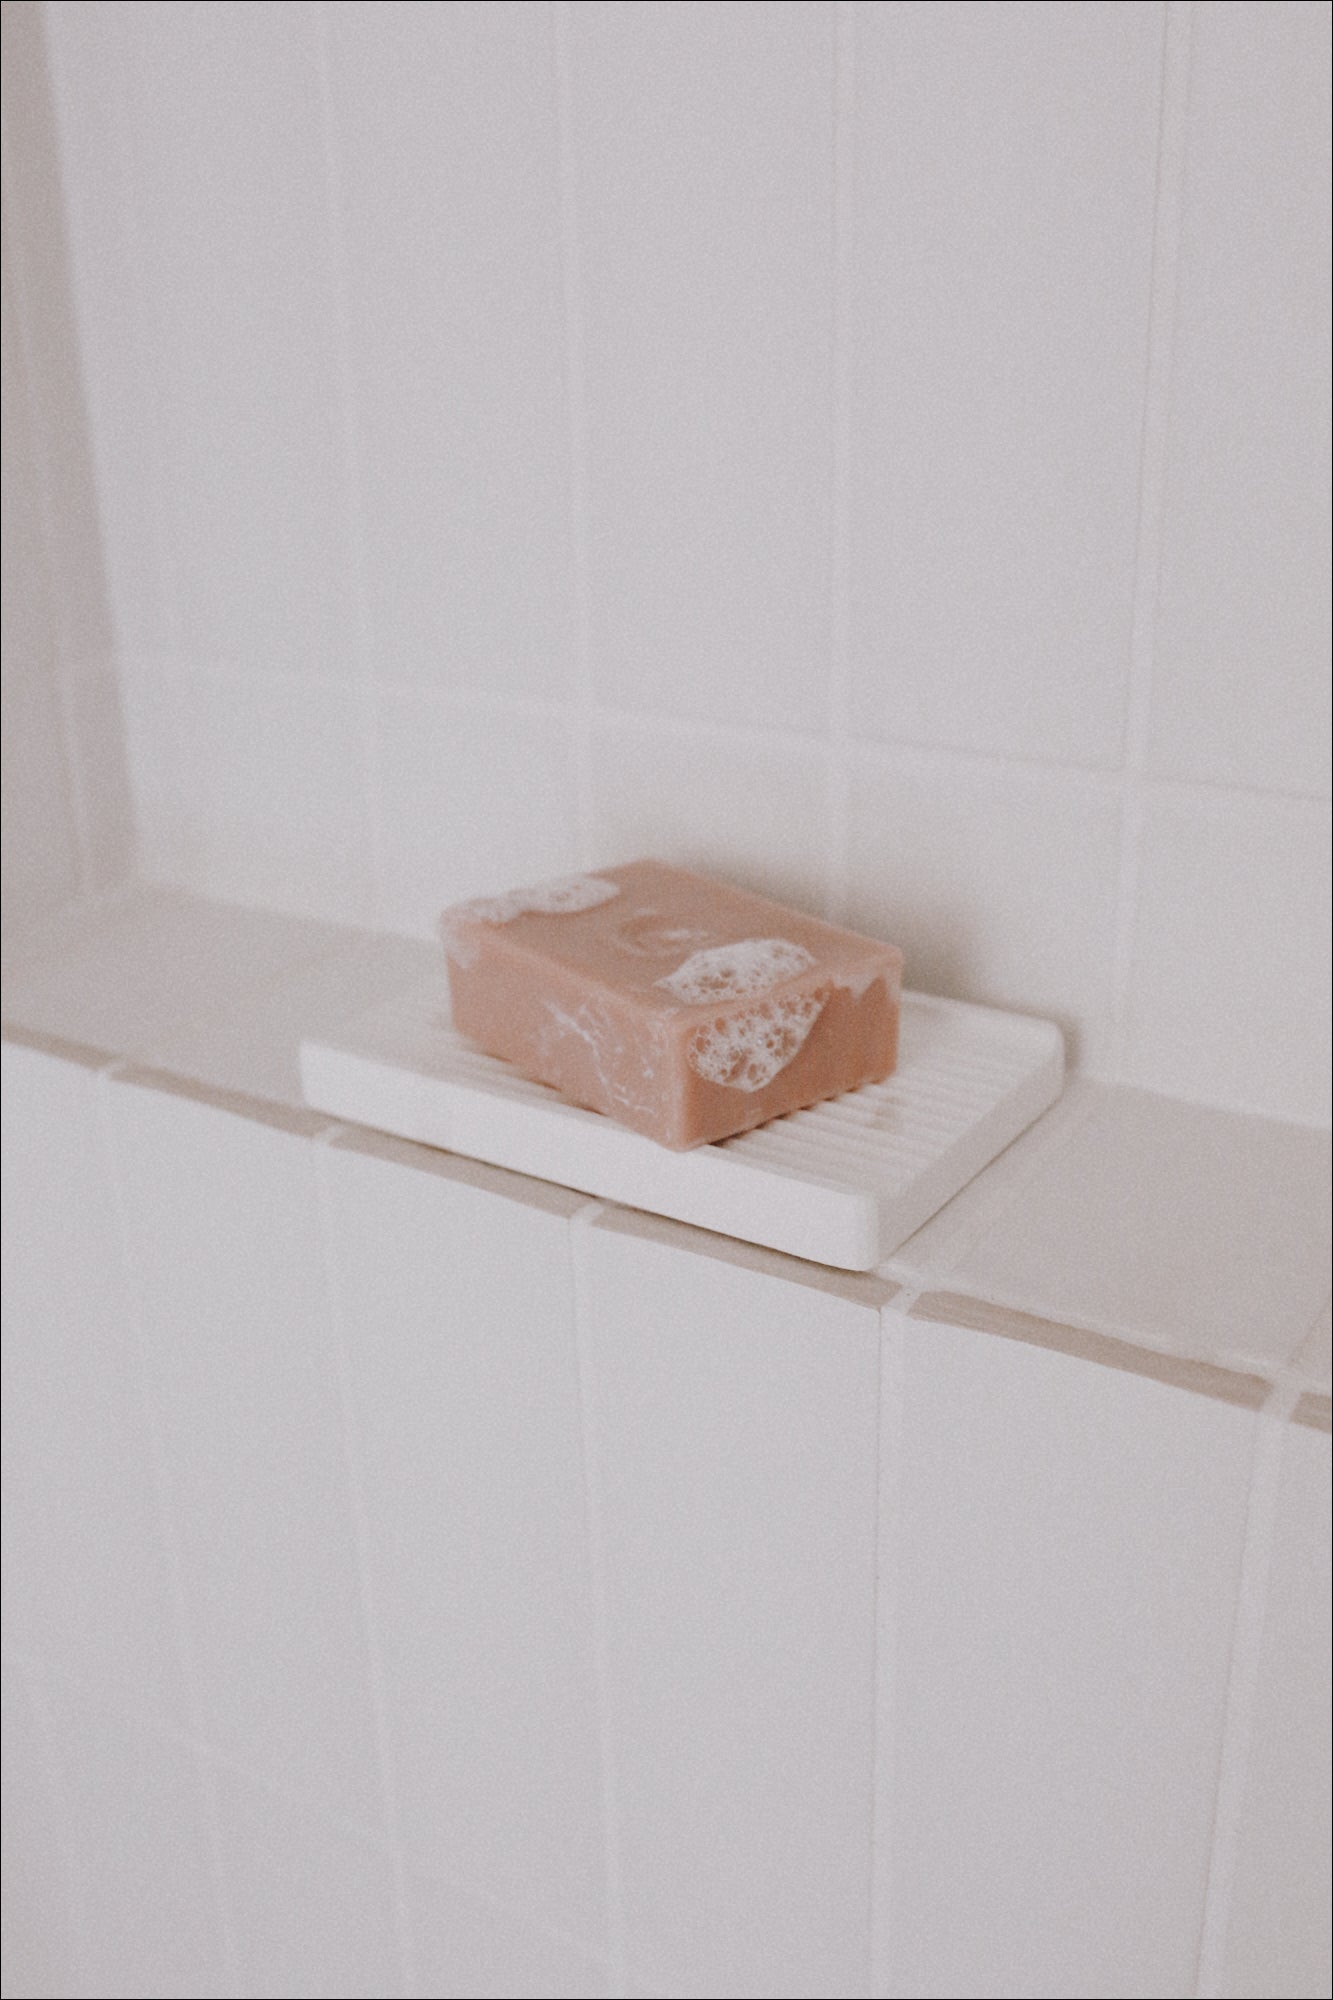 A photo of a Body Bar and Soap Dish on a shelf in a shower with bubbles on the Body Bar